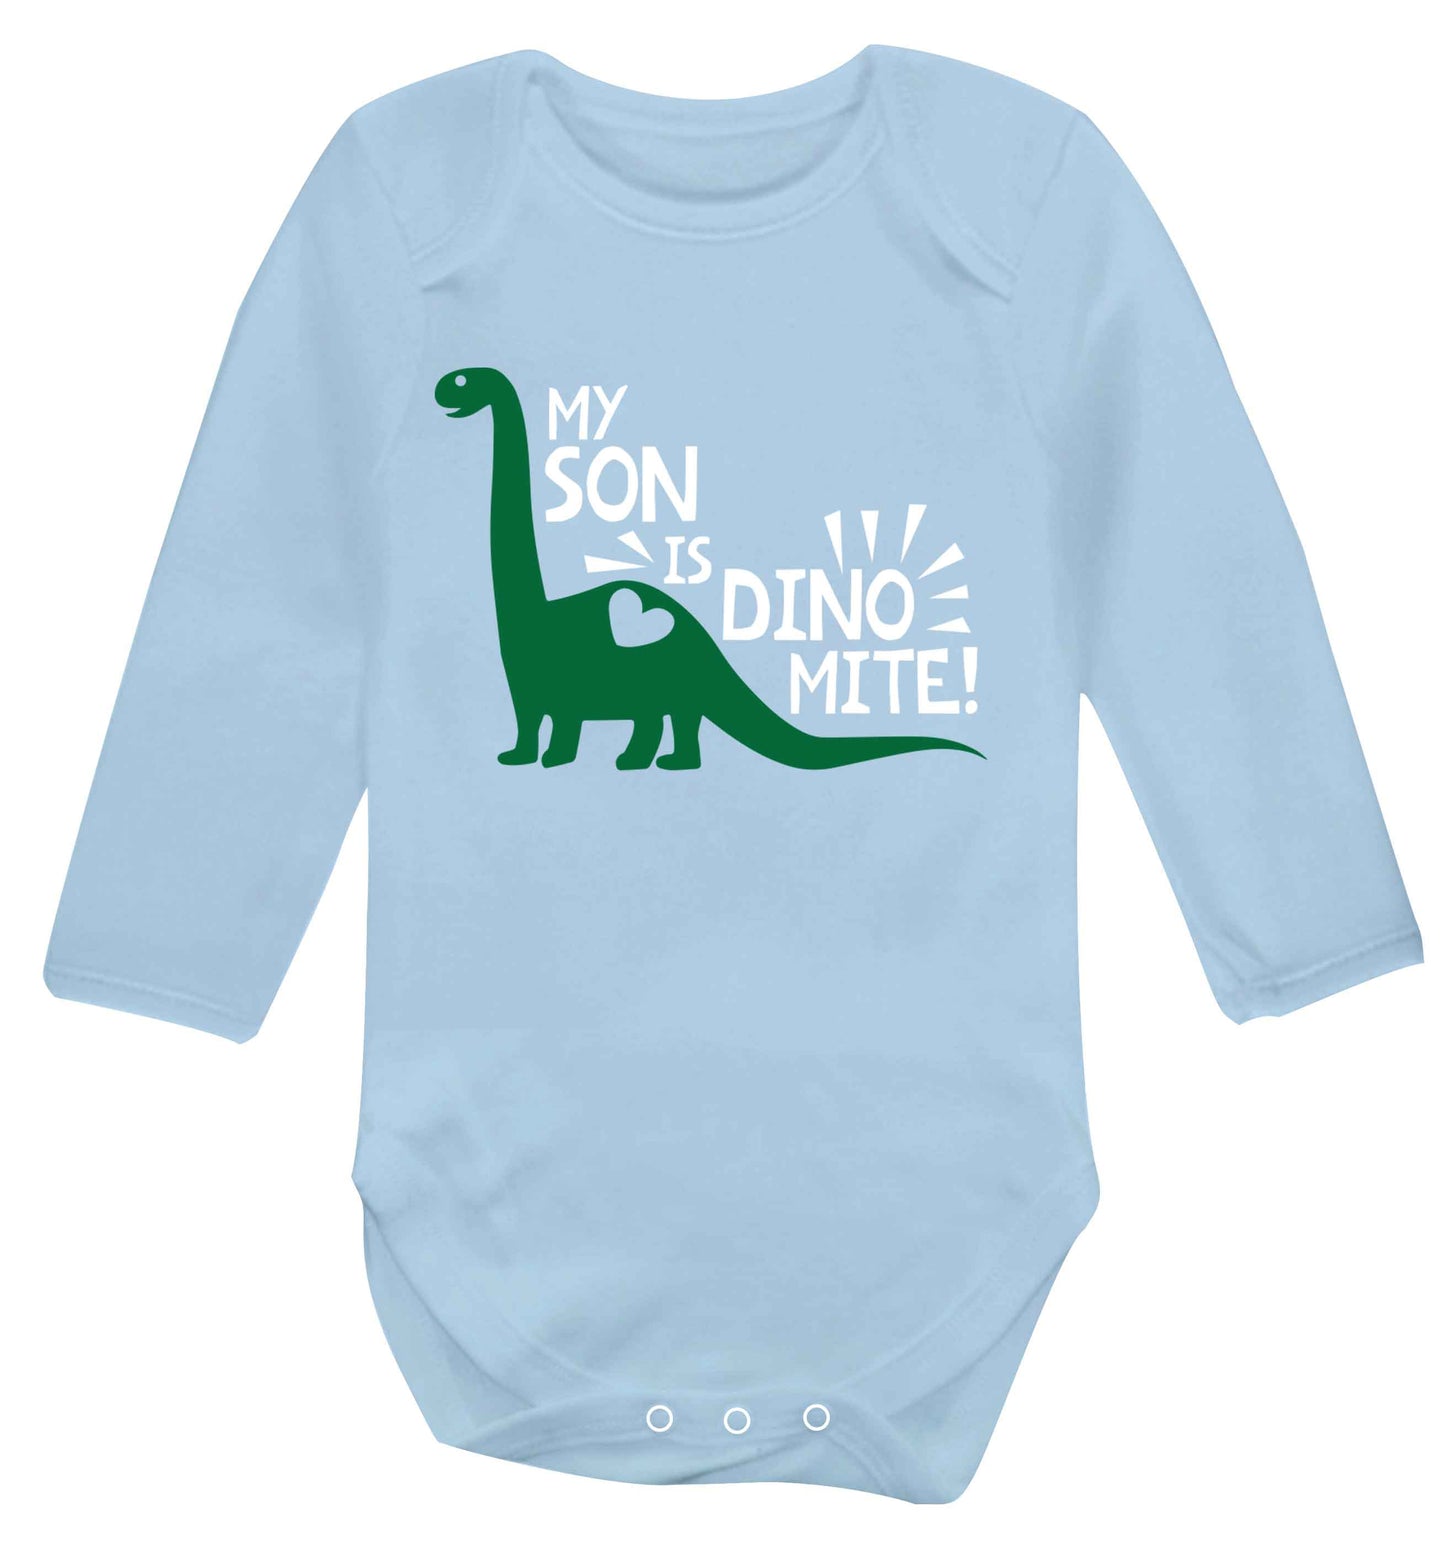 My son is dinomite! Baby Vest long sleeved pale blue 6-12 months